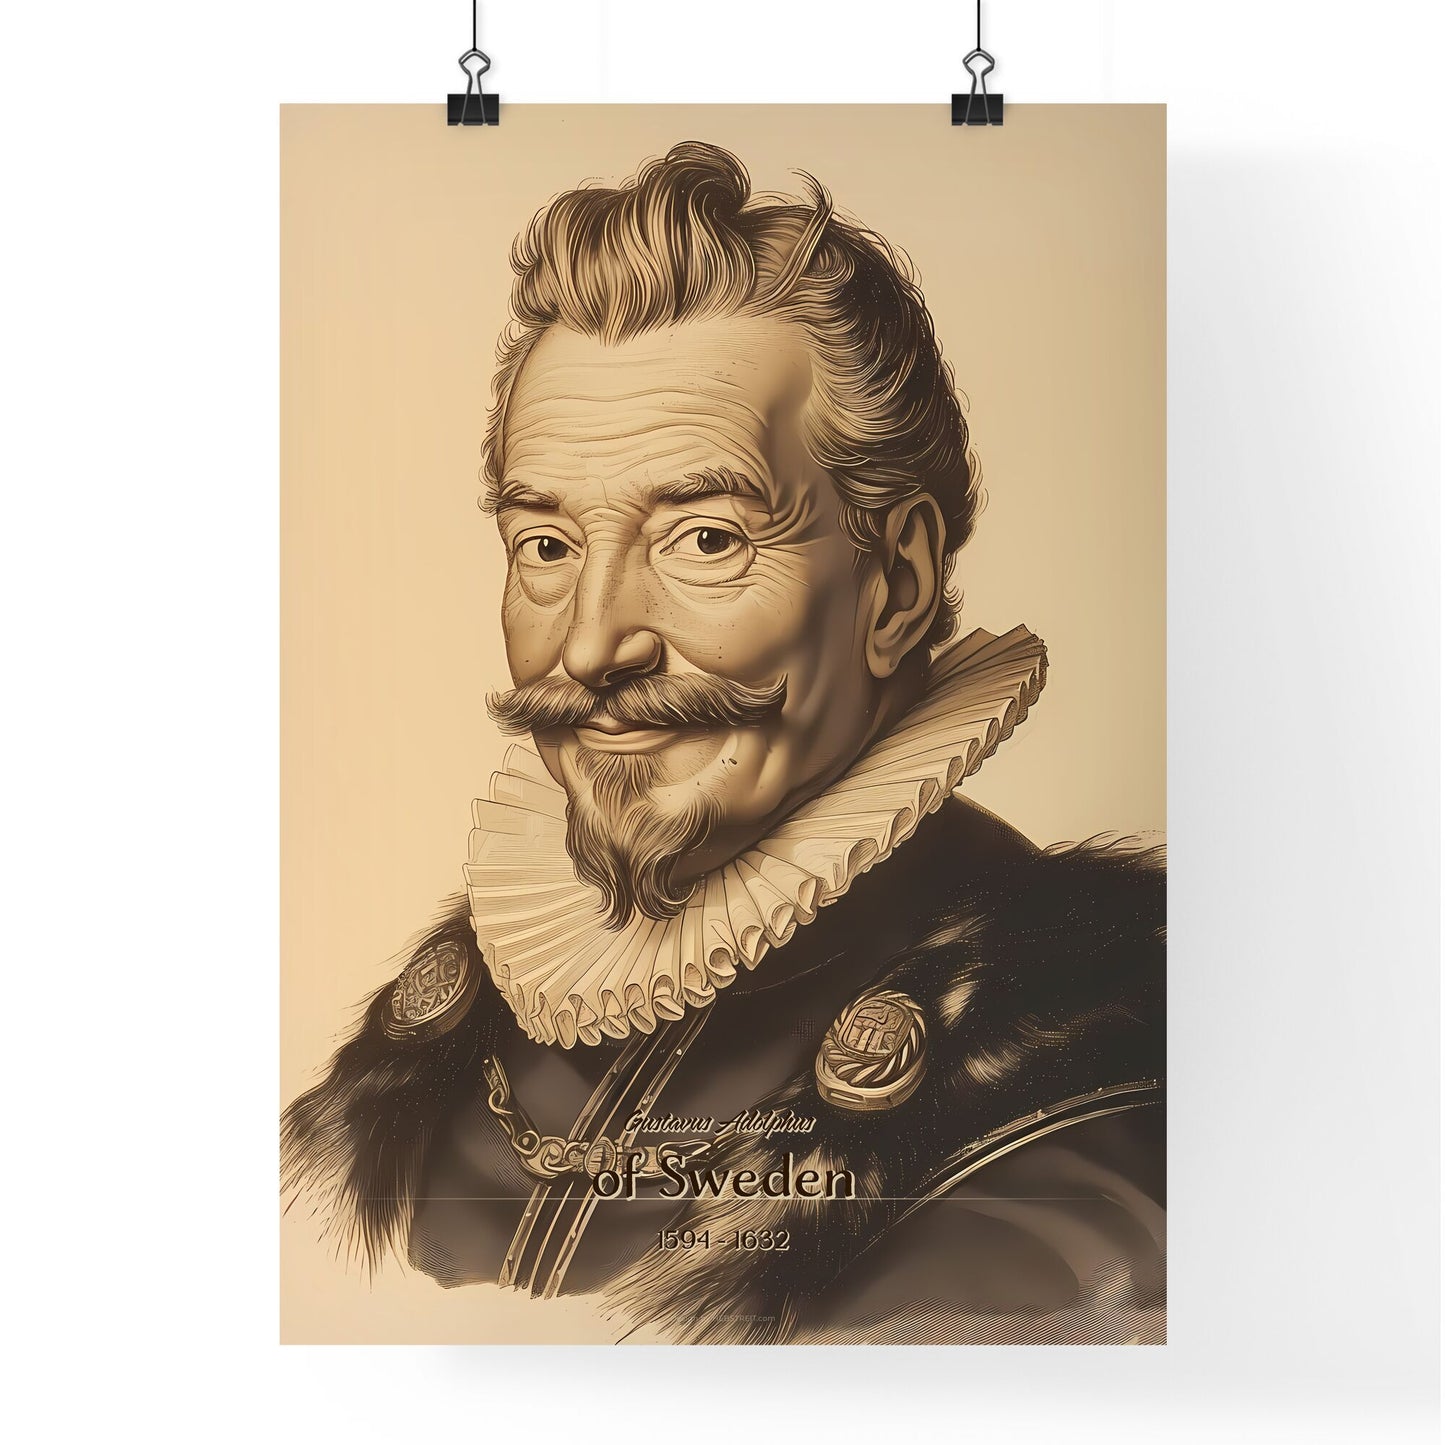 Gustavus Adolphus, of Sweden, 1594 - 1632, A Poster of a man with a mustache and a ruffled collar Default Title